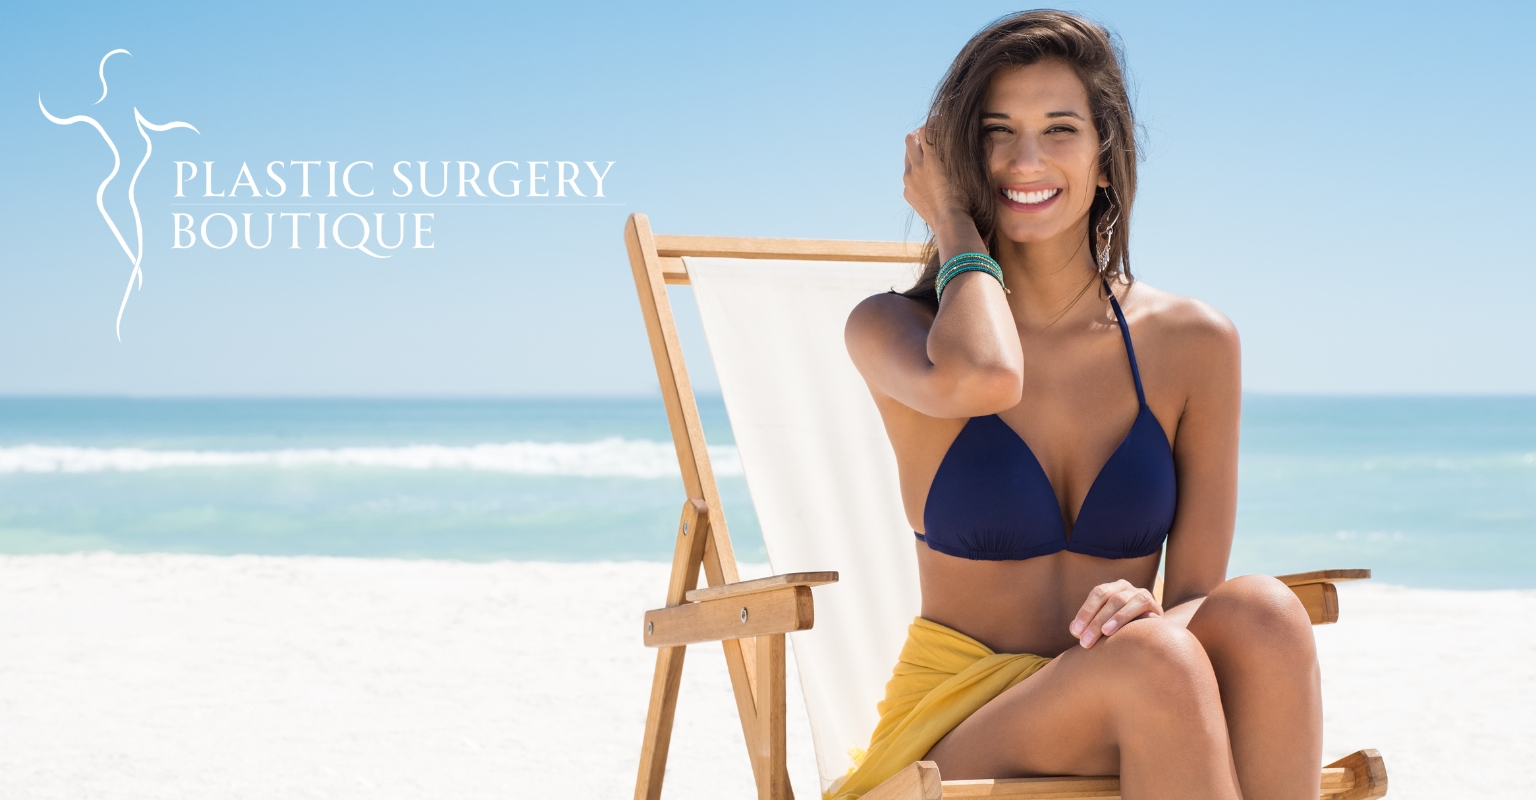 Confident Woman Enjoying Miami Beach After Successful Breast Augmentation Surgery